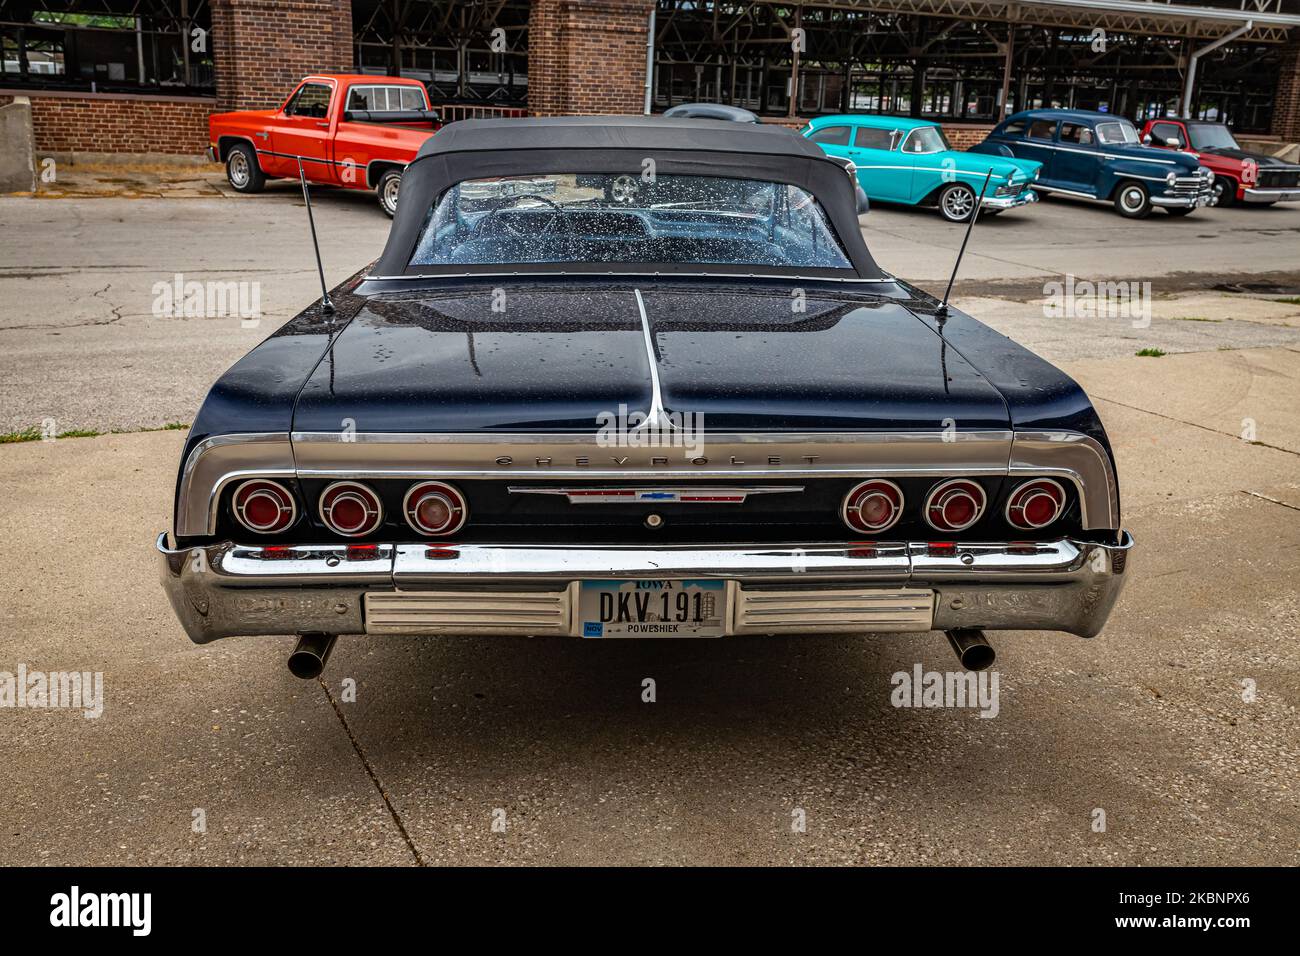 Des Moines, IA - July 01, 2022: High perspective rear view of a 1964 Chevrolet Impala Convertible at a local car show. Stock Photo